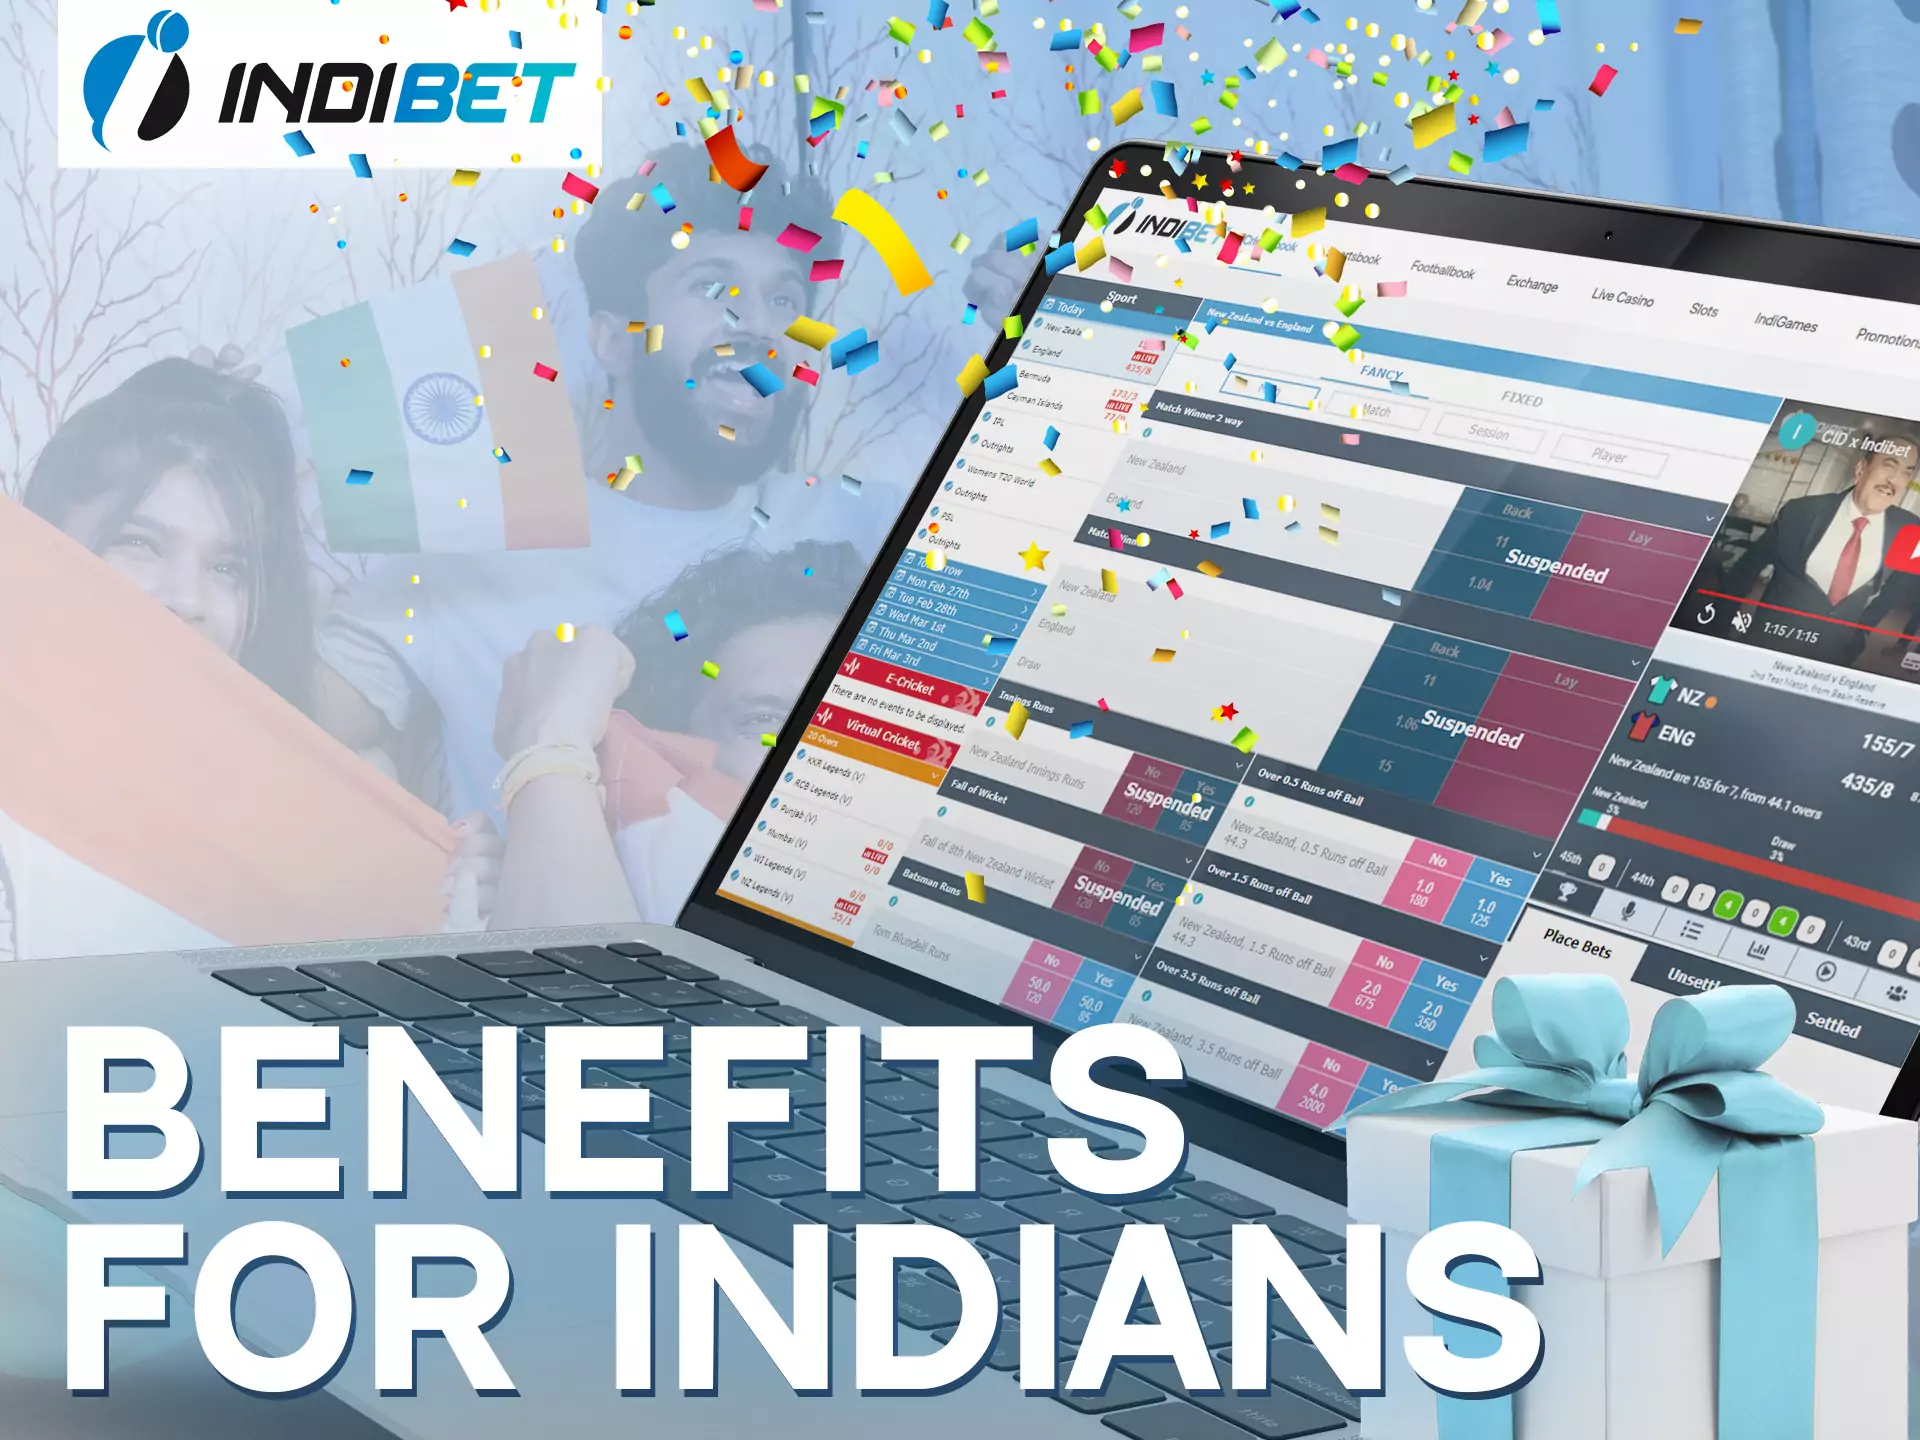 Indibet offers many nice and profitable bonuses to players from India.